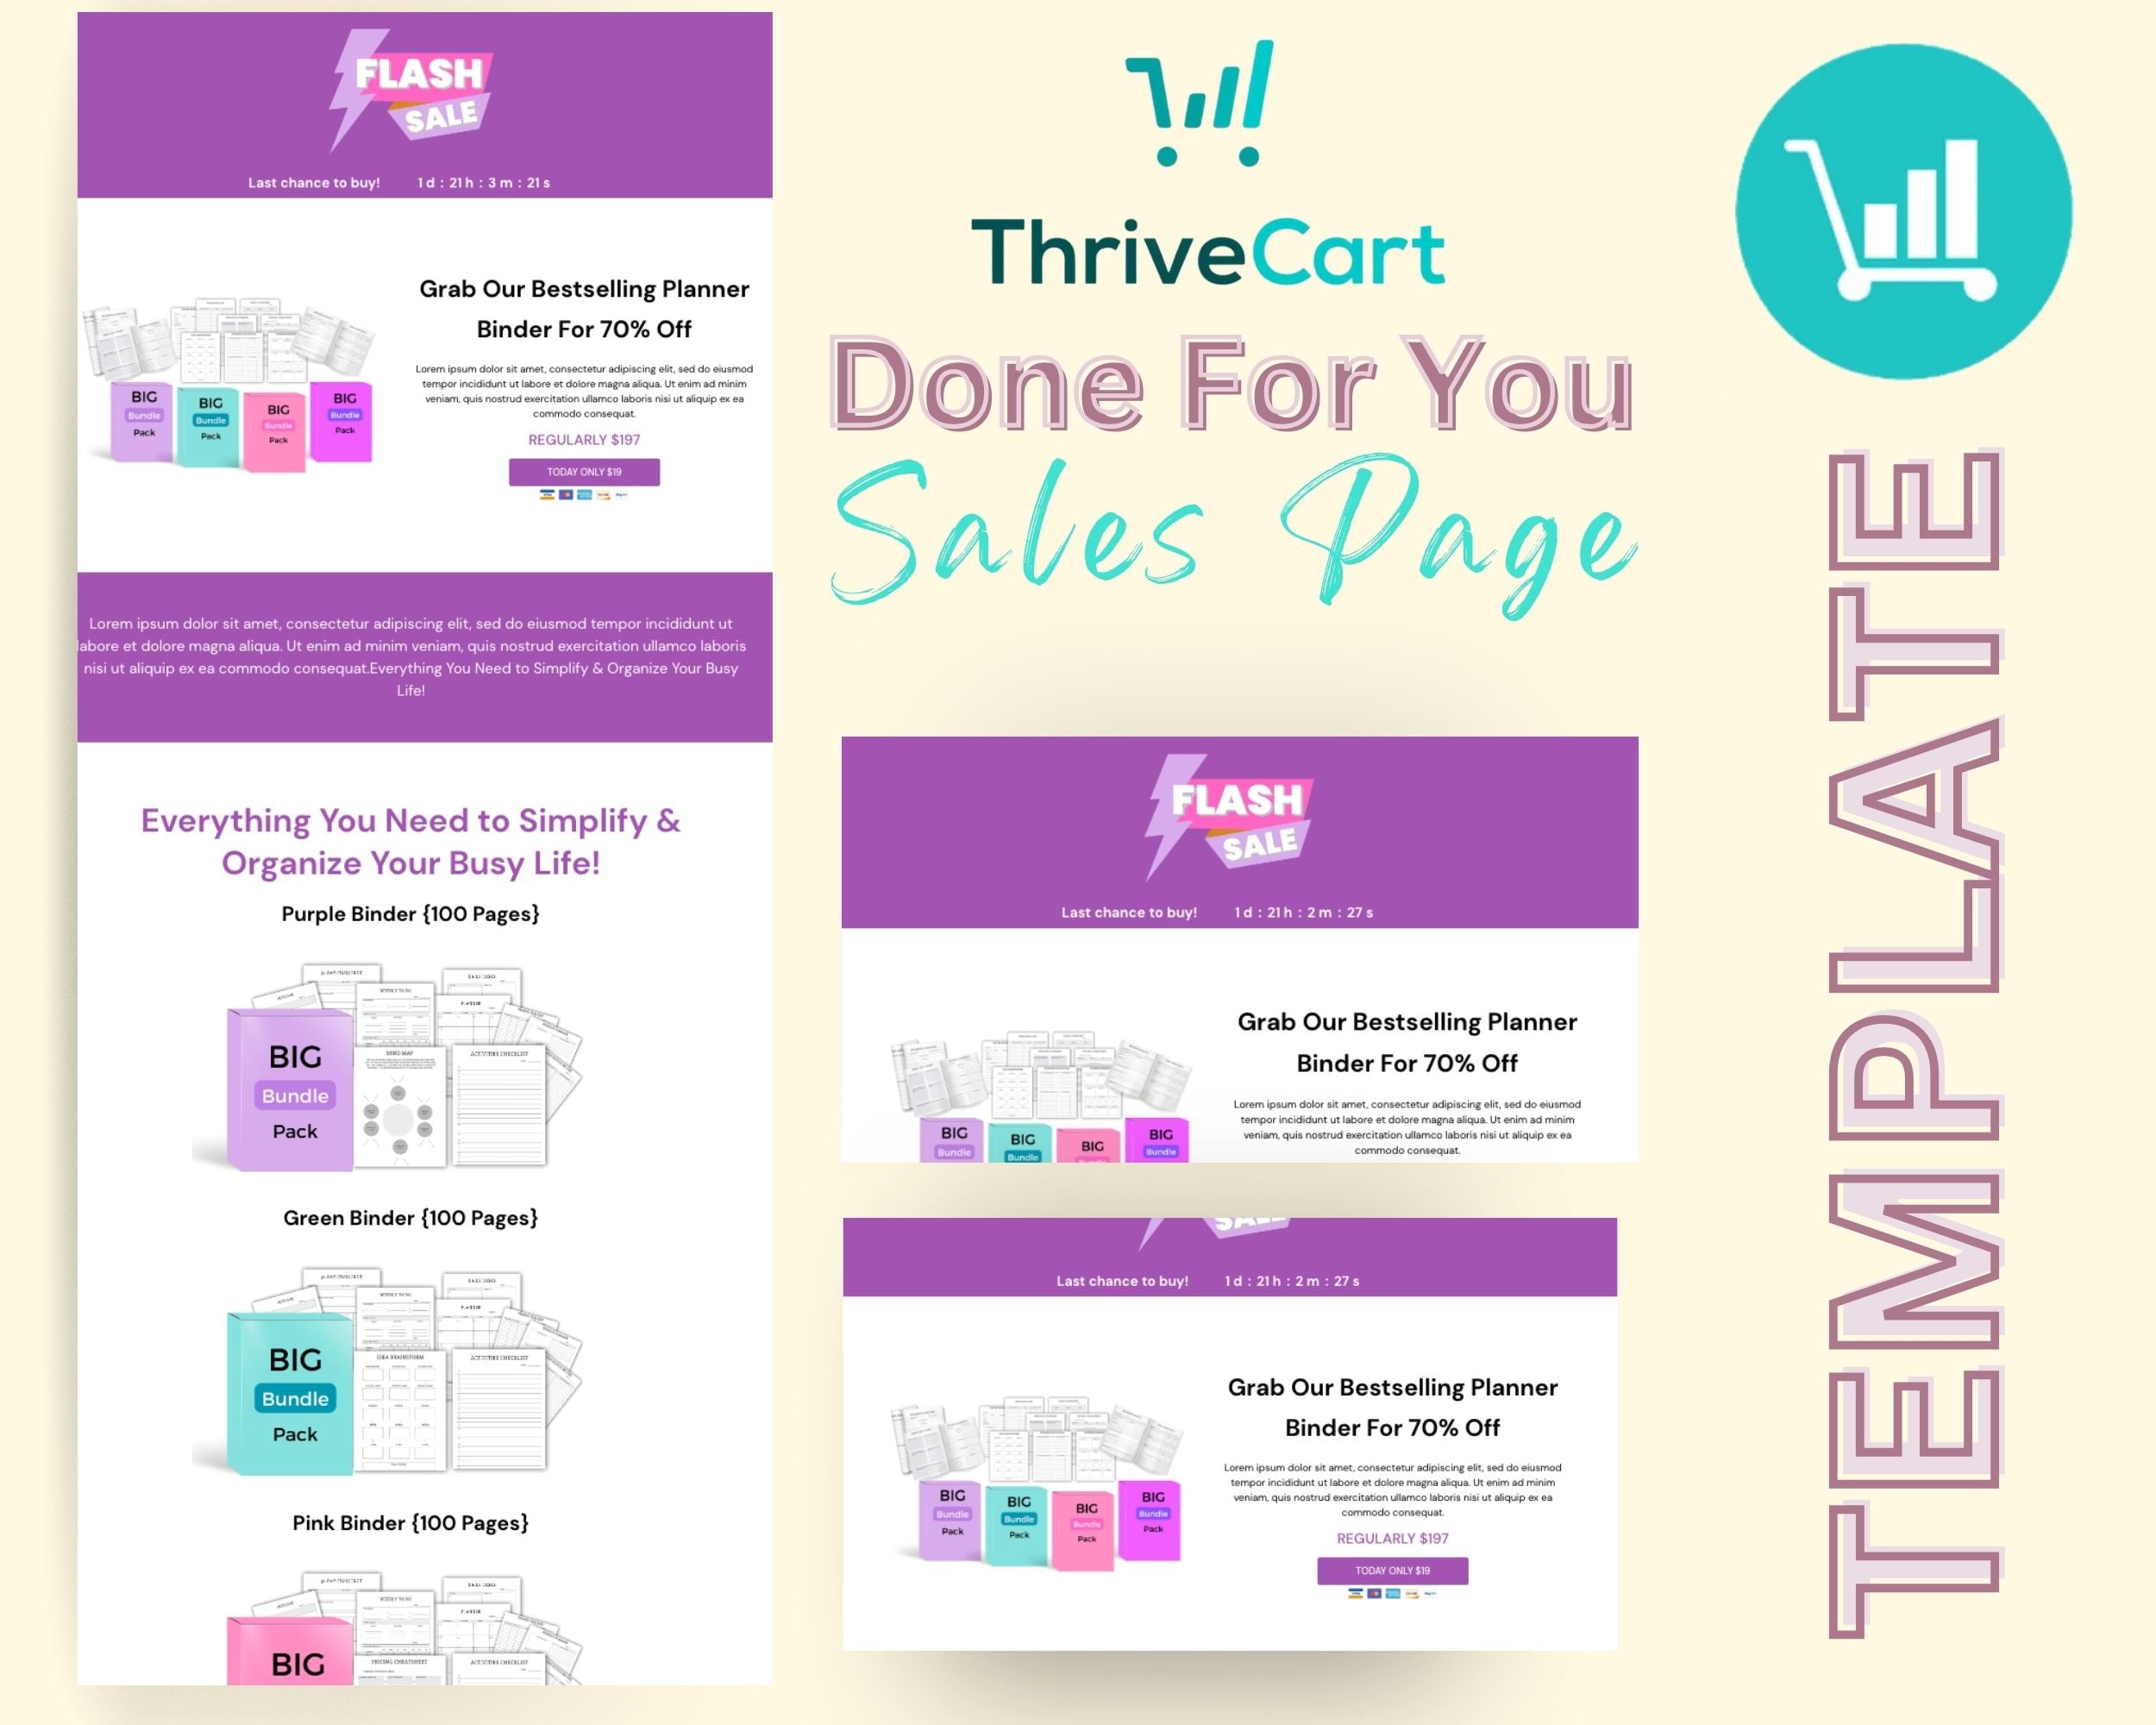 Flash Sale Printable Sales Page Template in ThriveCart